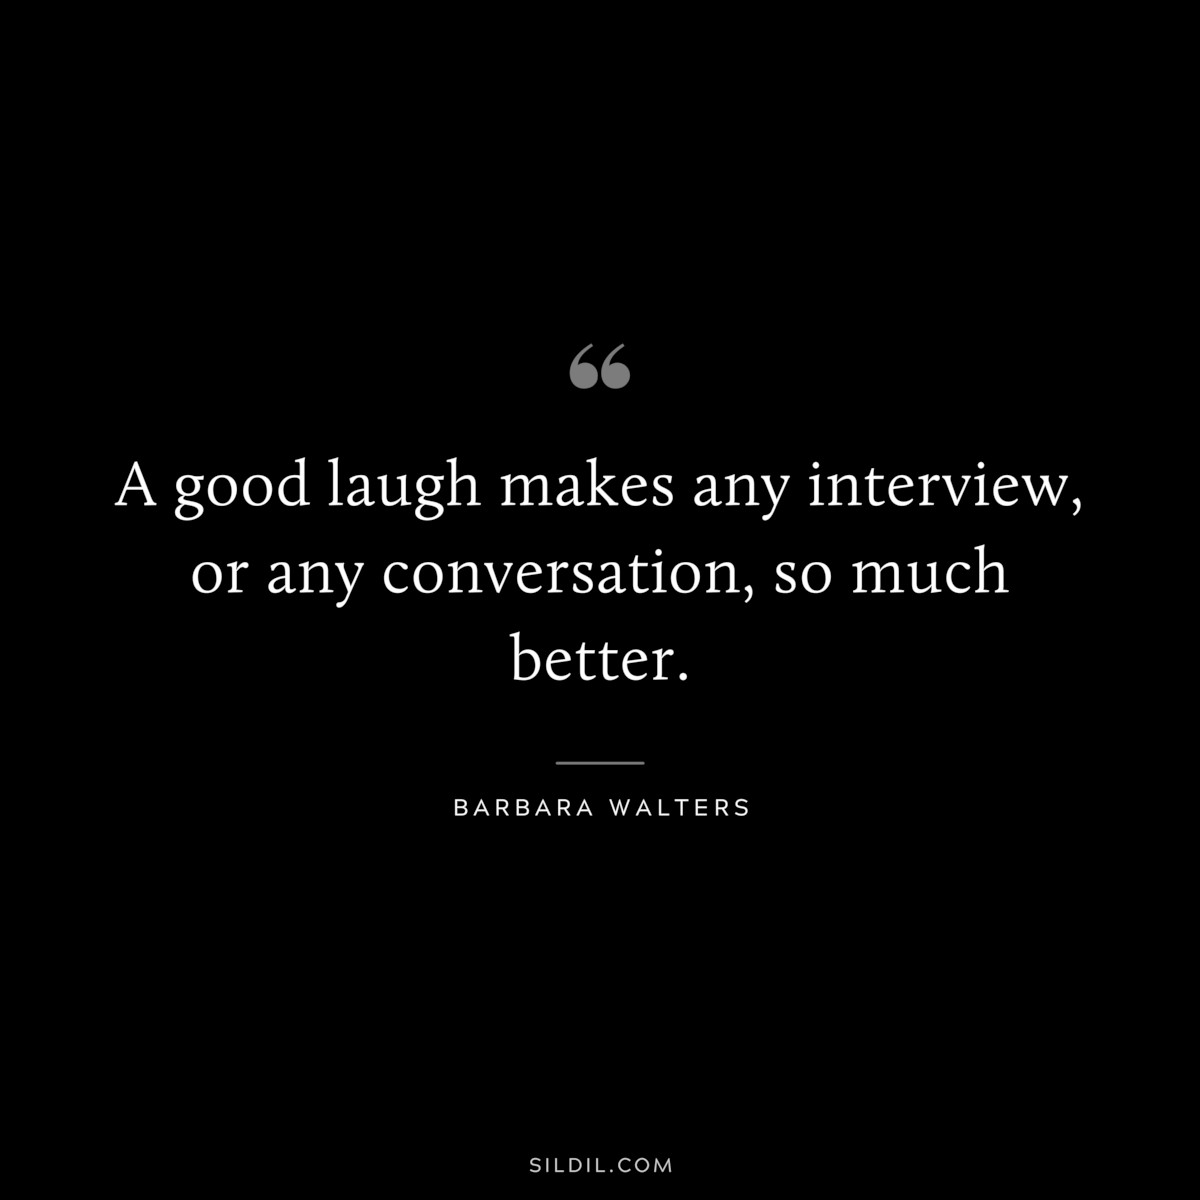 A good laugh makes any interview, or any conversation, so much better. ― Barbara Walters